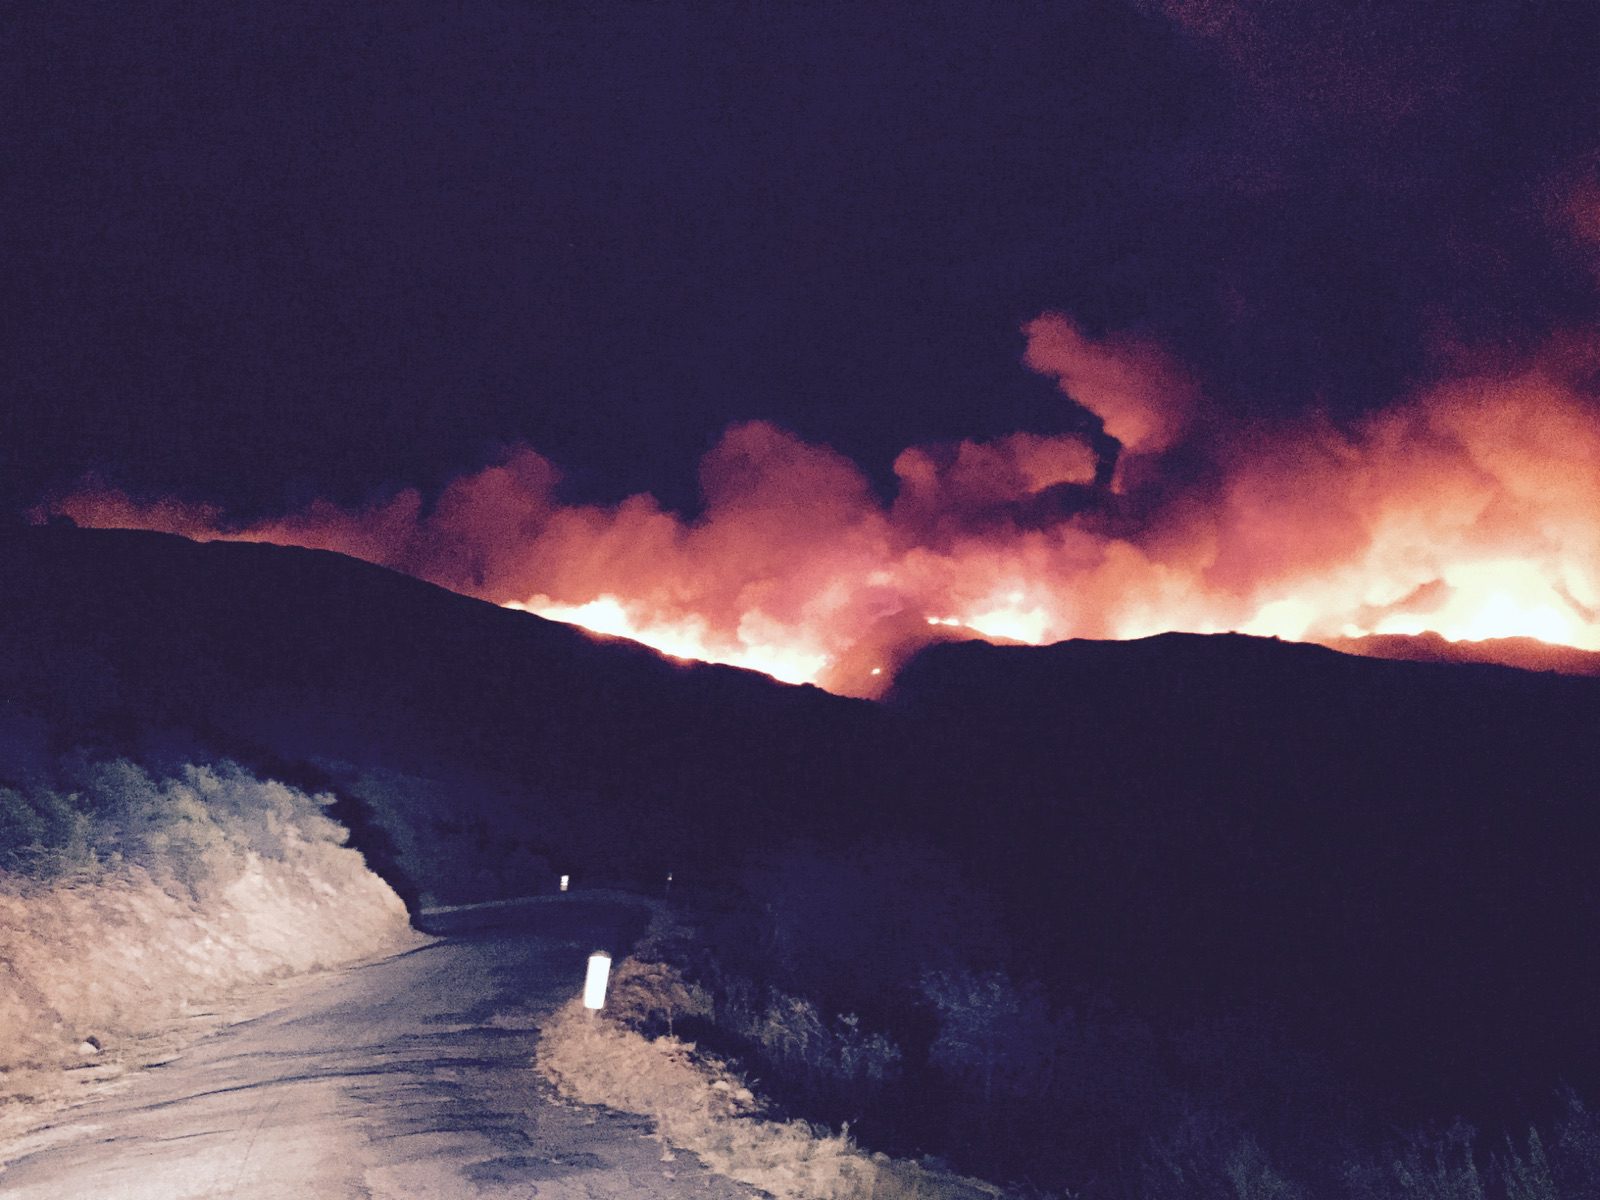 Fire reported on top of Refugio Rd in SY Mountains